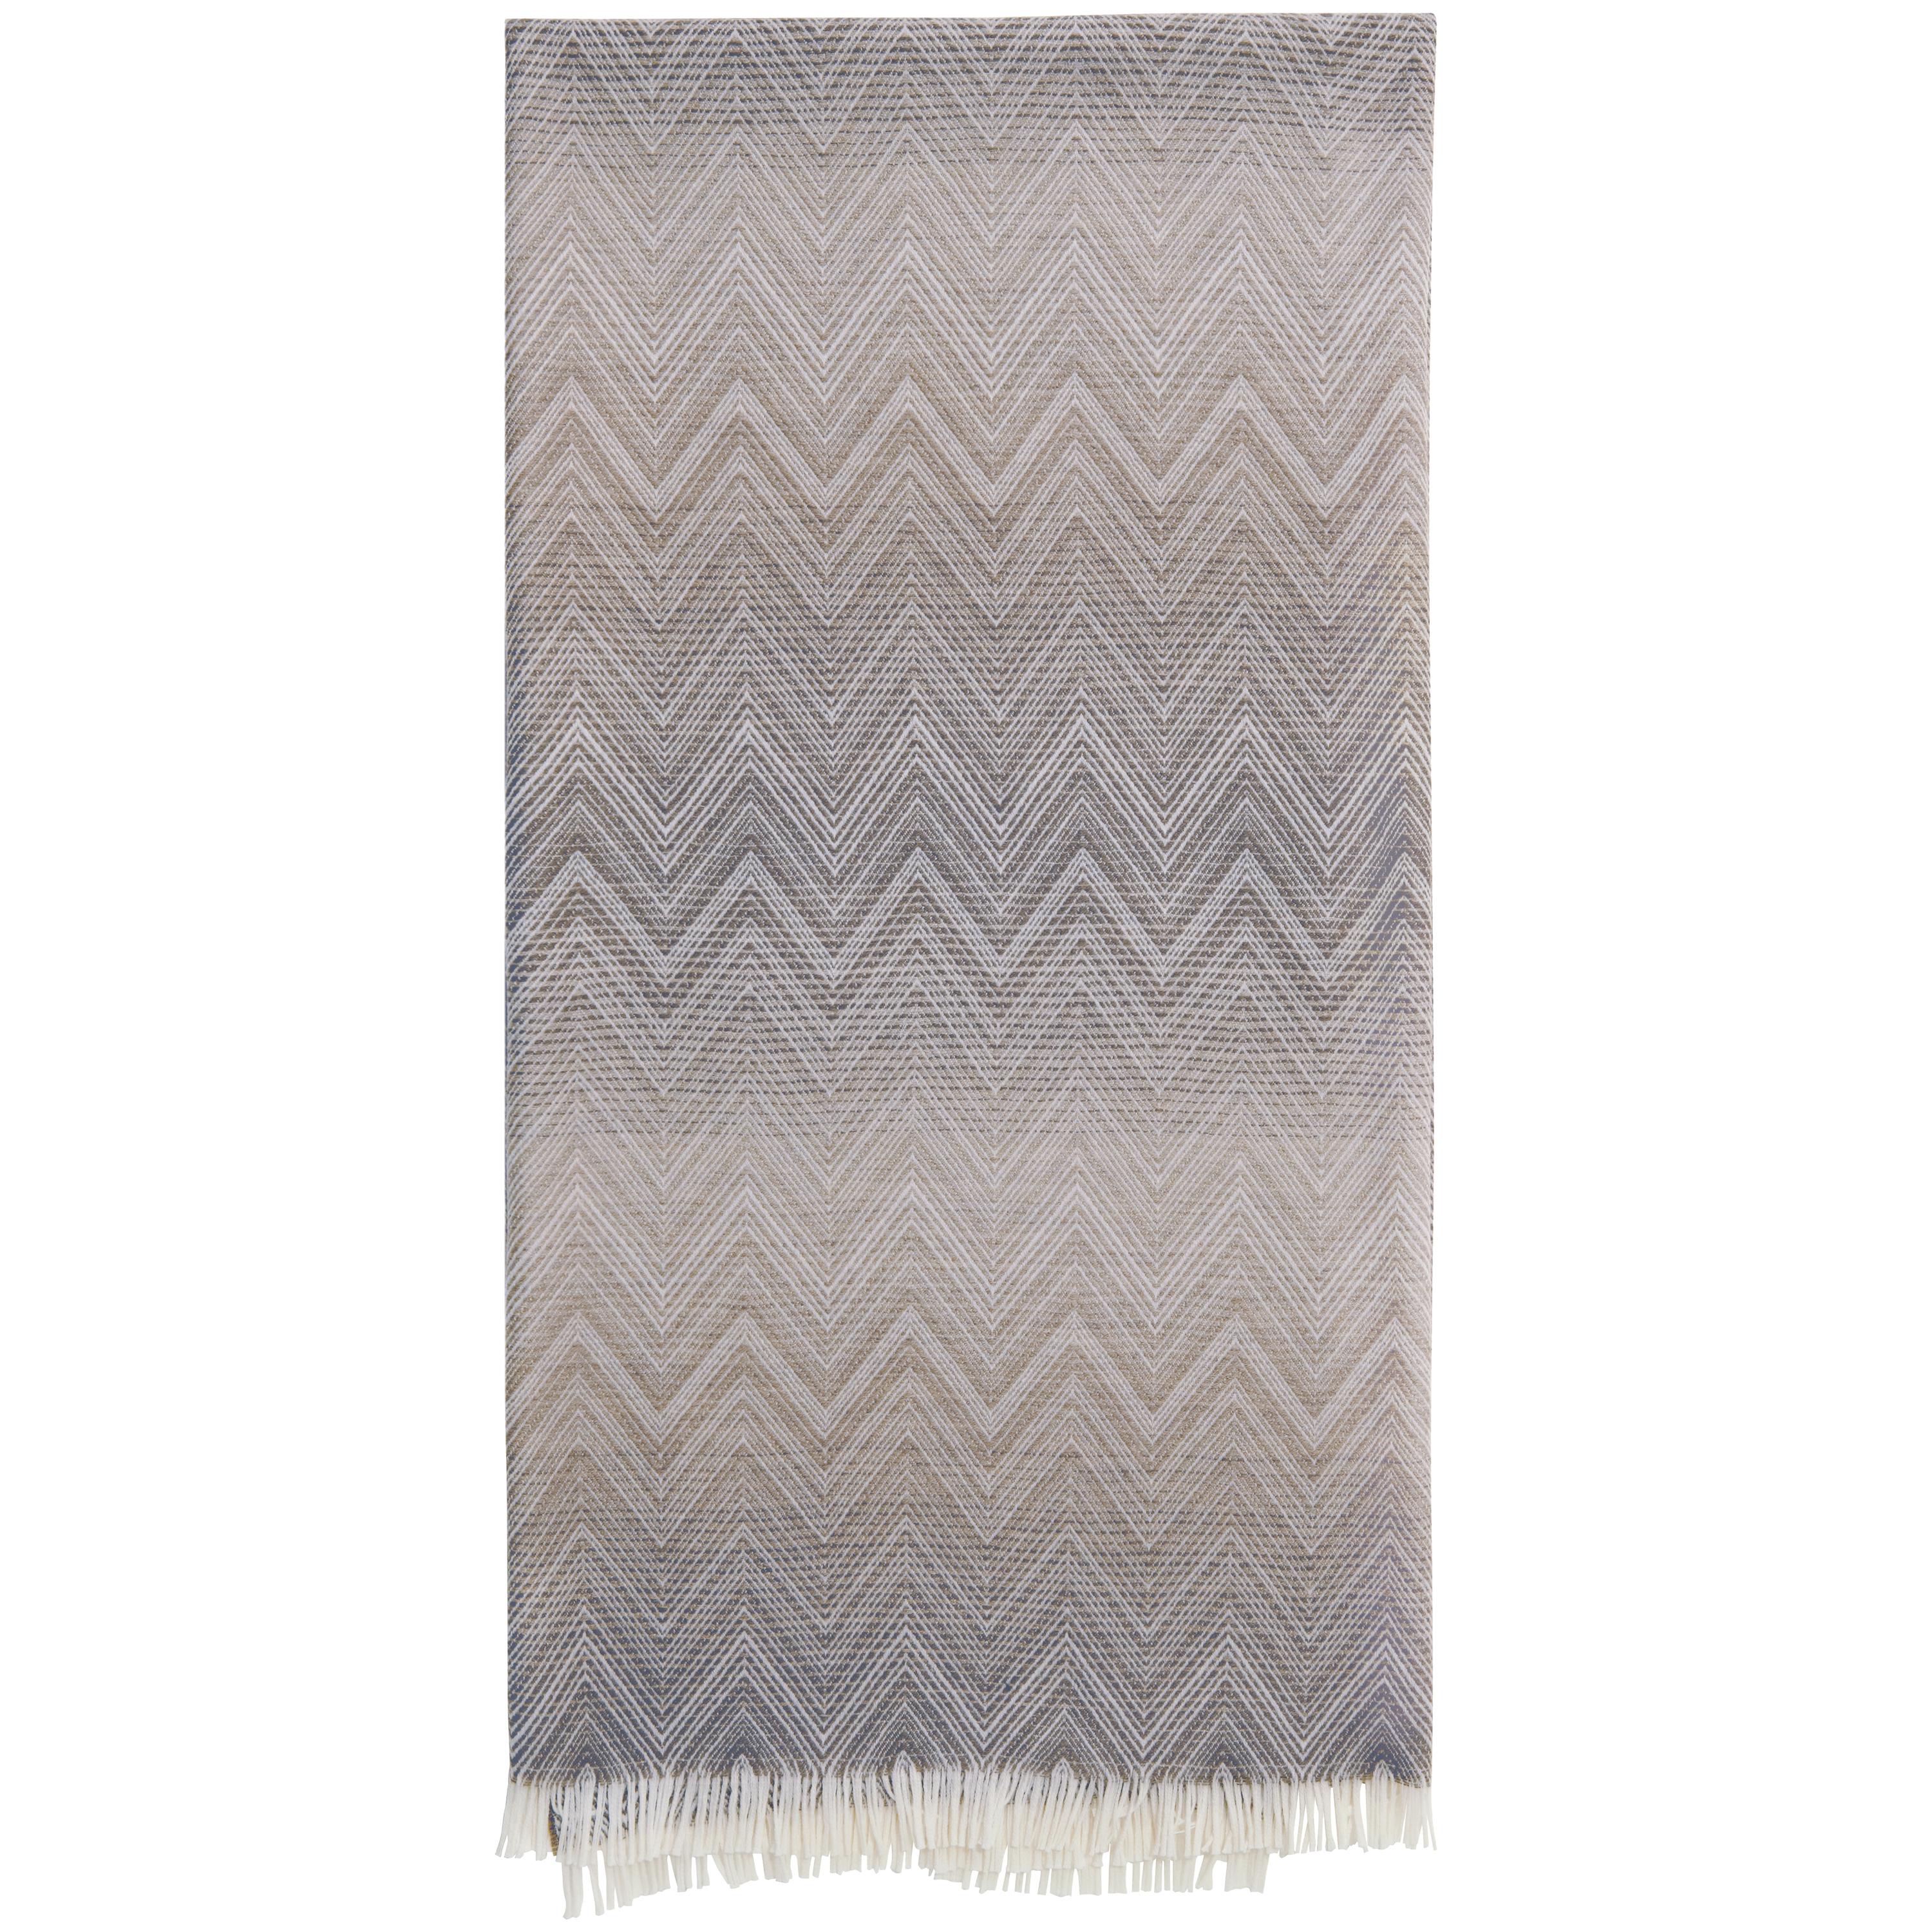 Missoni Home Timmy Throw in Beige and Gray Chevron Print For Sale